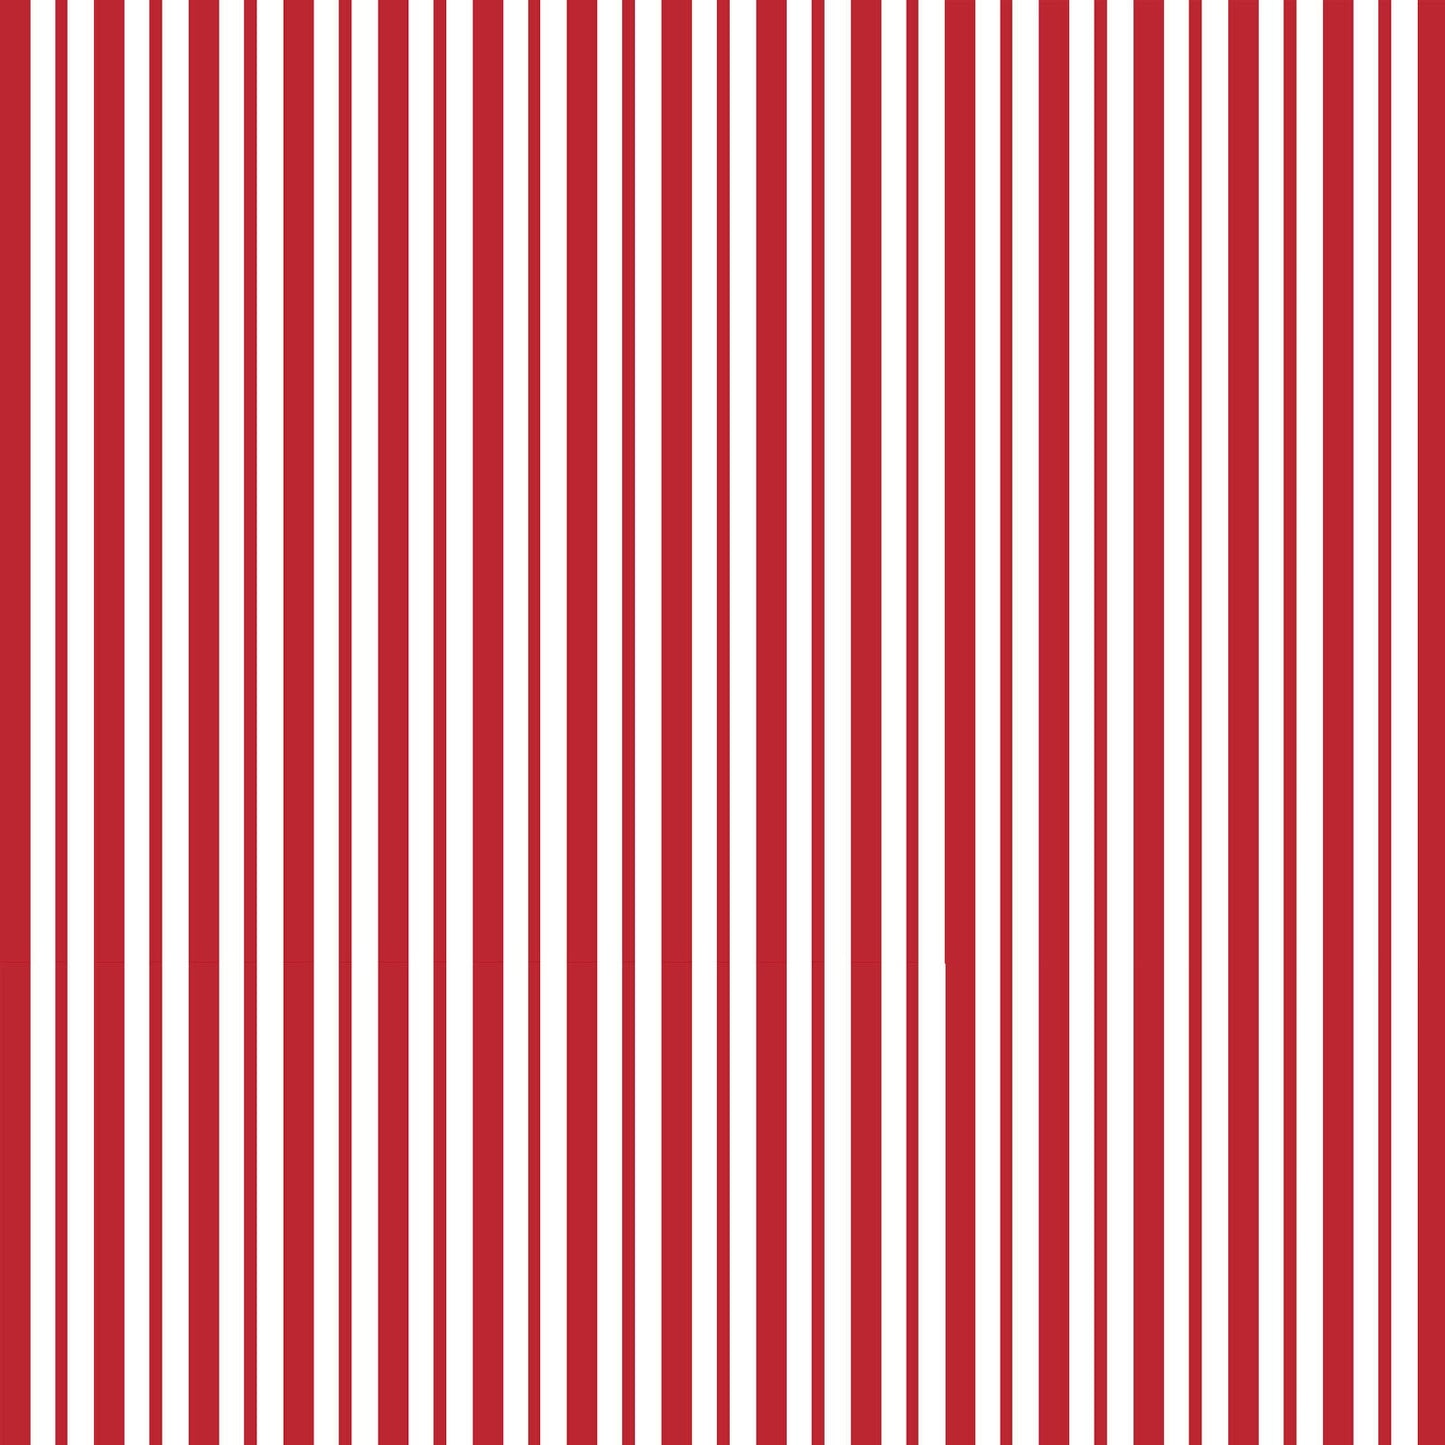 Mini Awning Stripe in red (MAS8249-R) is part of the Kimberbell Basics line designed by Kim Christopherson for Maywood Studio. This fabric features red stripes in two sizes on a white background, and adds a soft red texture to projects.